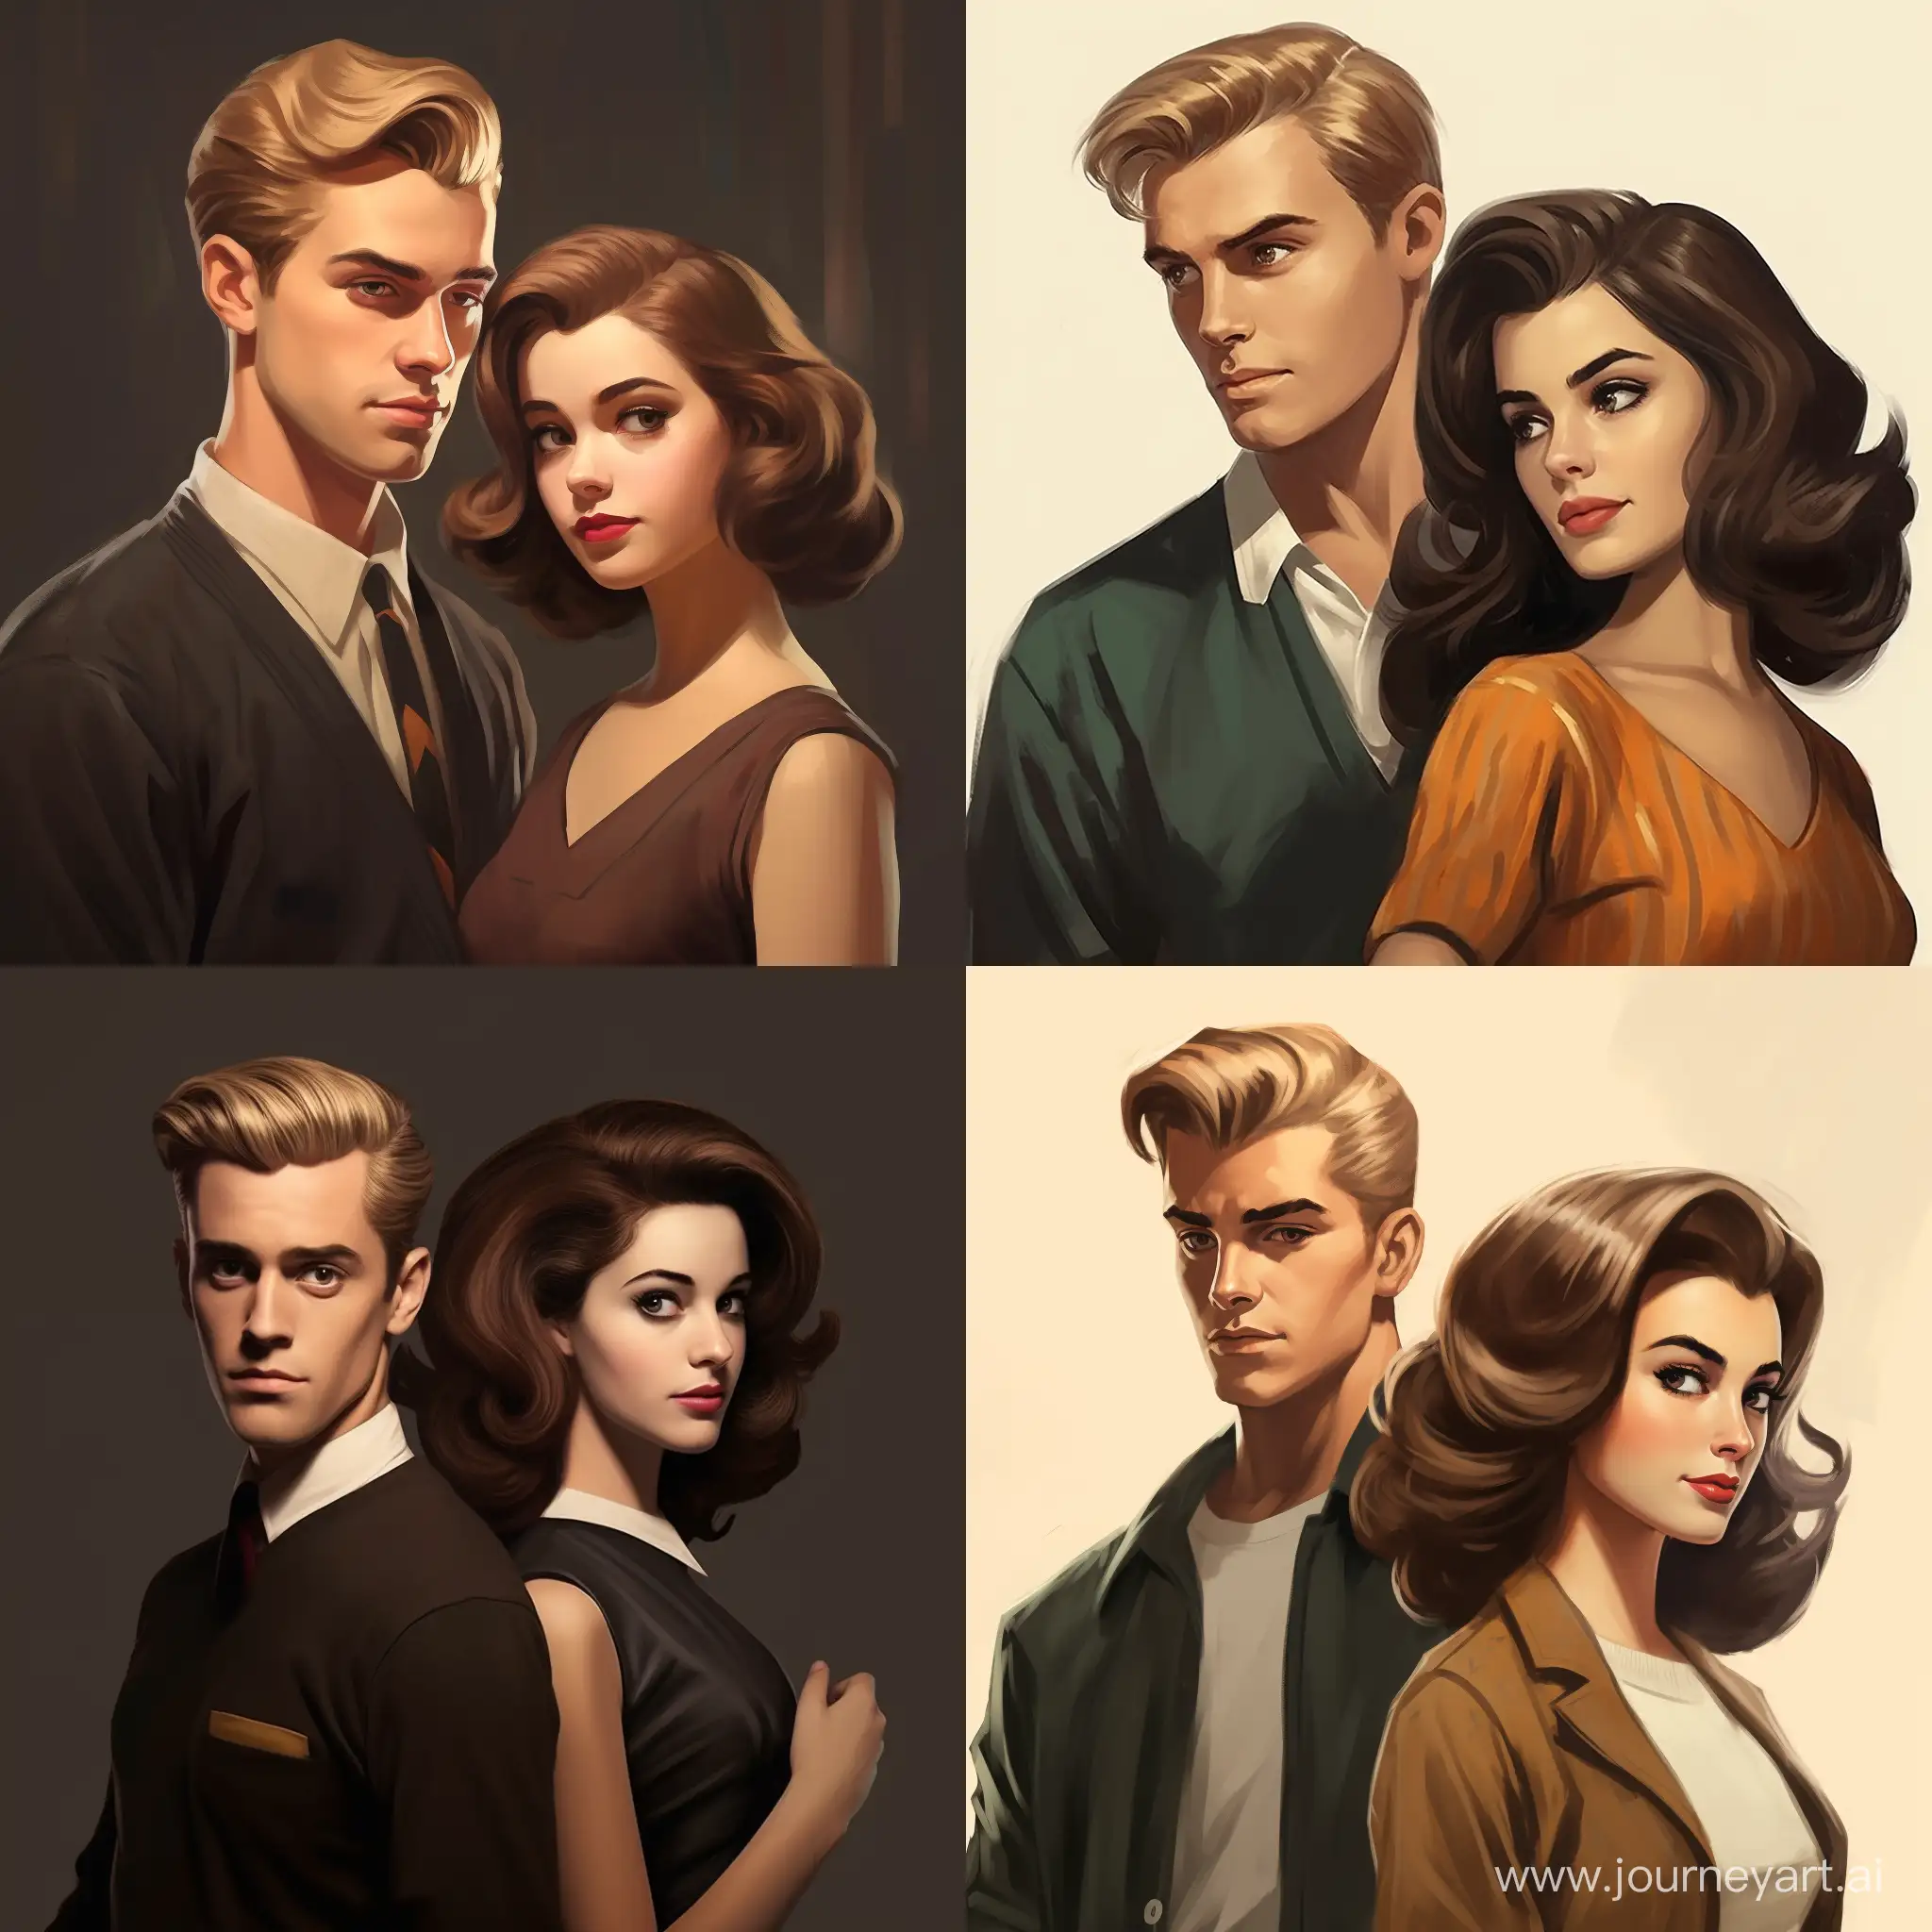 Draco Malfoy and Hermione Granger in the style of the 1960s. Hermione is a brunette!